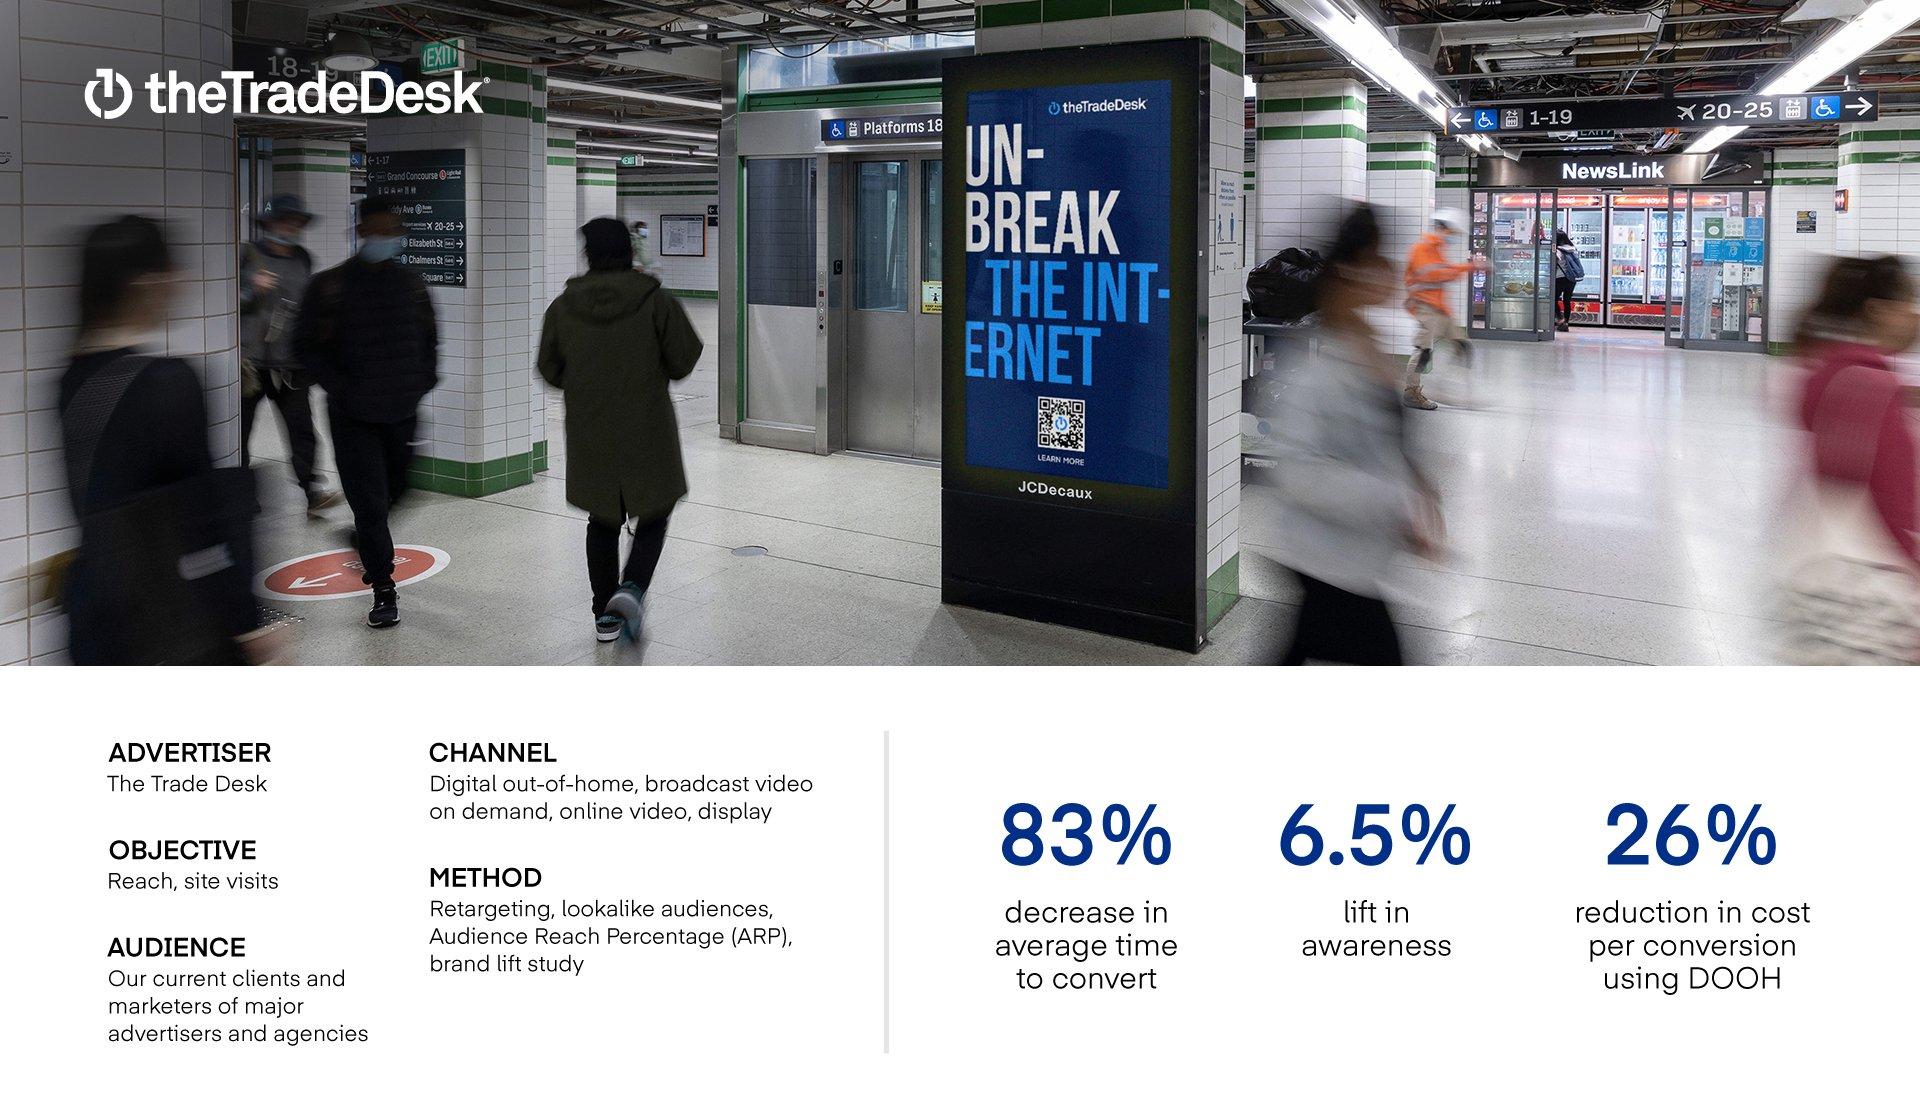 Image of a DOOH ad with people walking by, under are text case study results from The Trade Desk